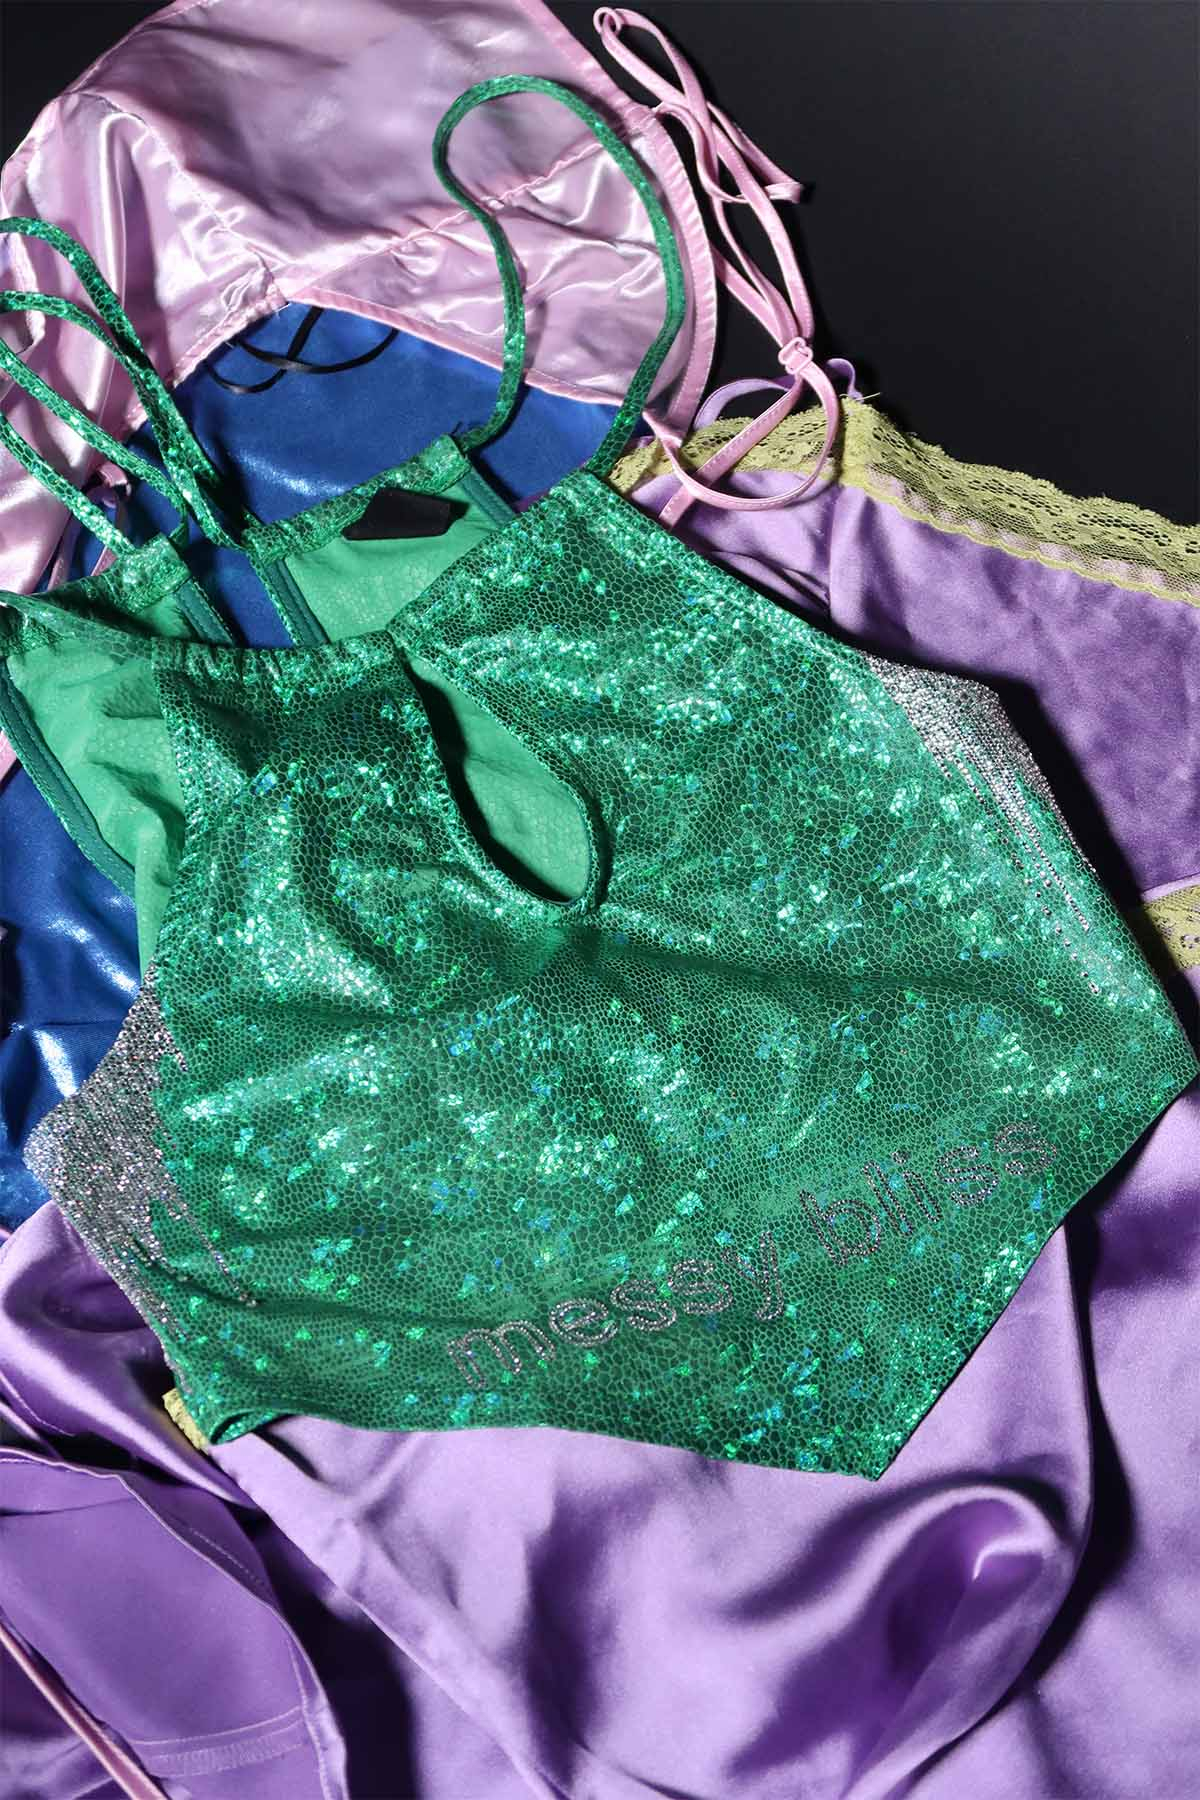 A metallic green halter-neck top is at the top of a pile of clothing on a black background. It has a slogan in silver rhinestones that says ‘messy bliss’. The underarm areas have lines of silver rhinestones. The rhinestones are saturated at the top of the underarm, but become individual droplets as they move down the side of the top.